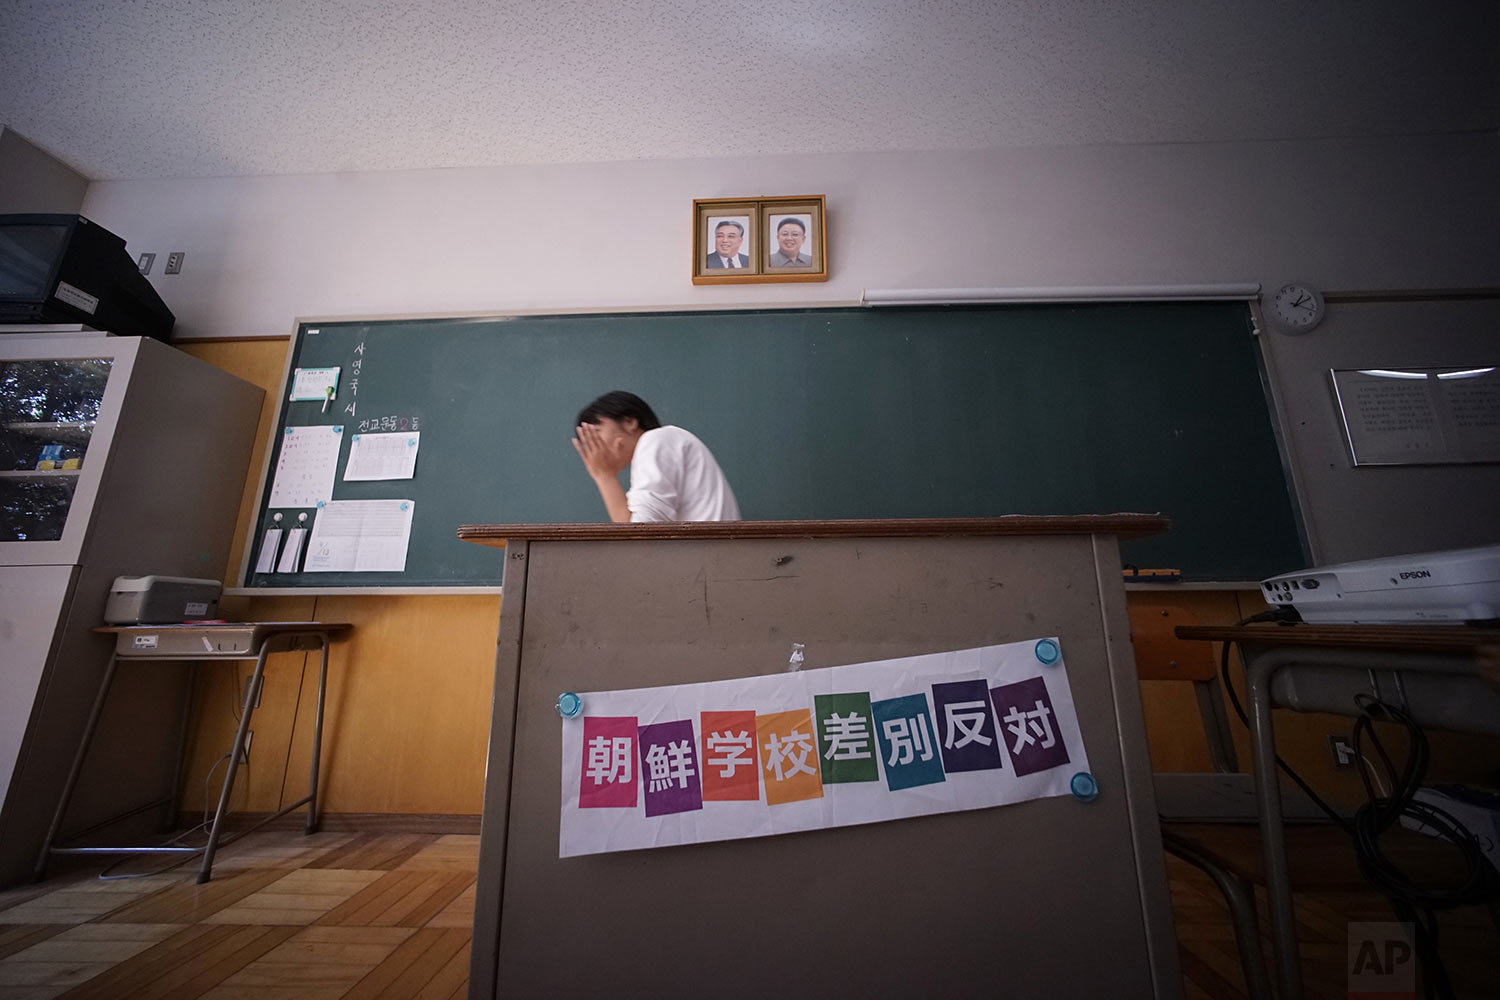  In this Sept. 26, 2017, photo, a student walks below the portraits of the late North Korean leaders Kim Il Sung and Kim Jong Il hang on the wall in a classroom with a banner reading "Against the discrimination against North Korean School" at a Korea